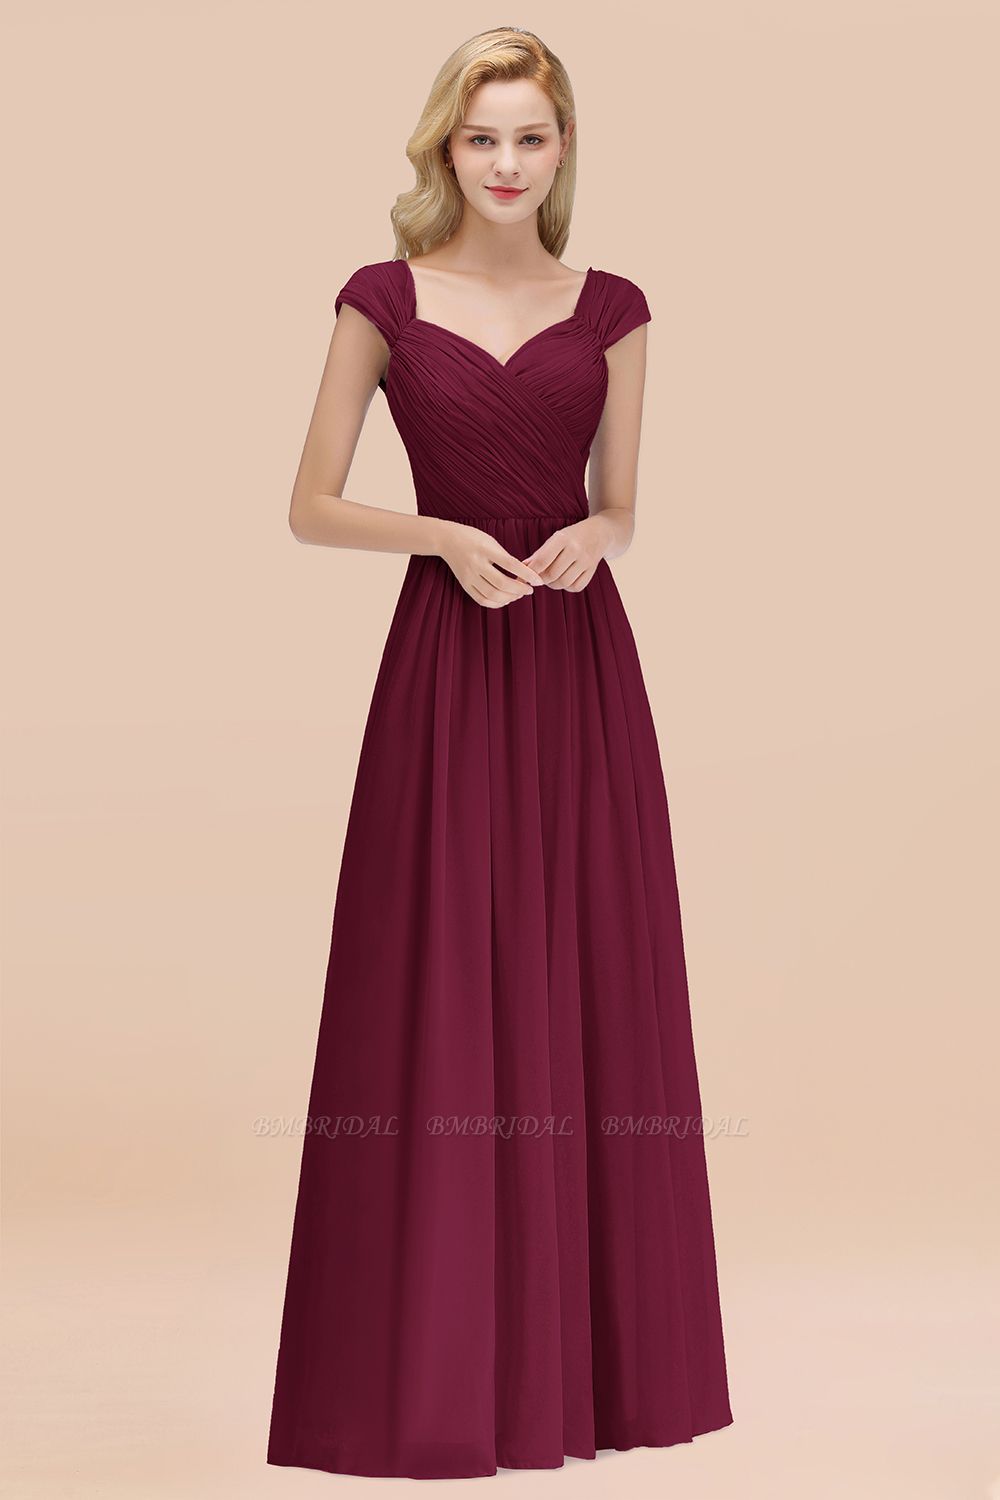 BMbridal Modest Chiffon Sweetheart Sleeveless Affordable Bridesmaid Dresses with Ruffles